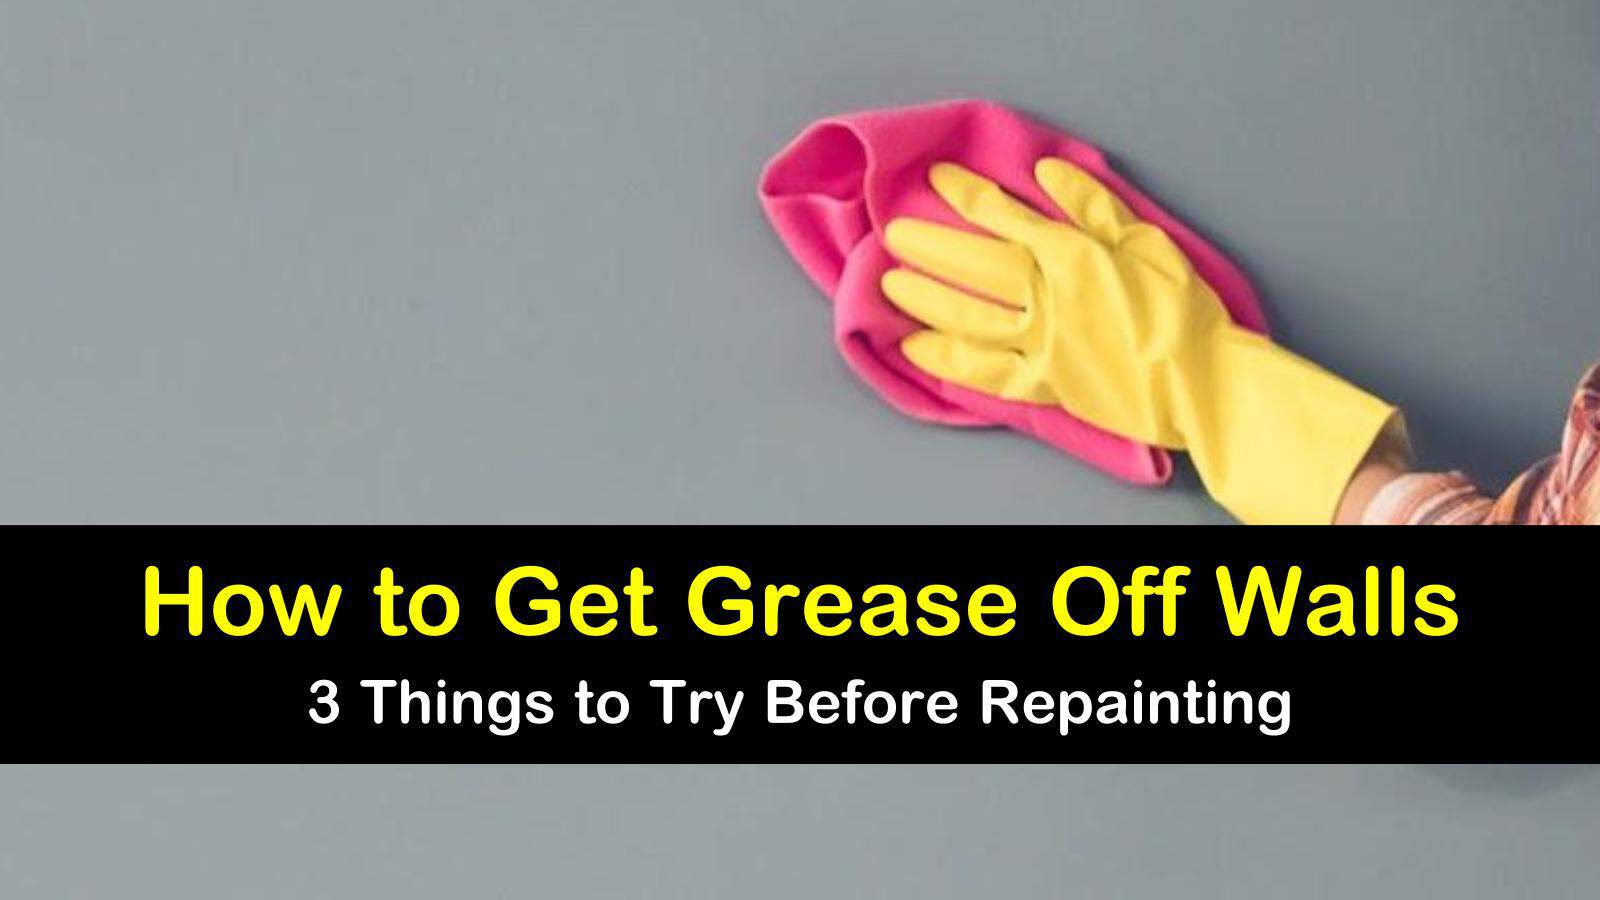 how to get grease off walls titleimg1